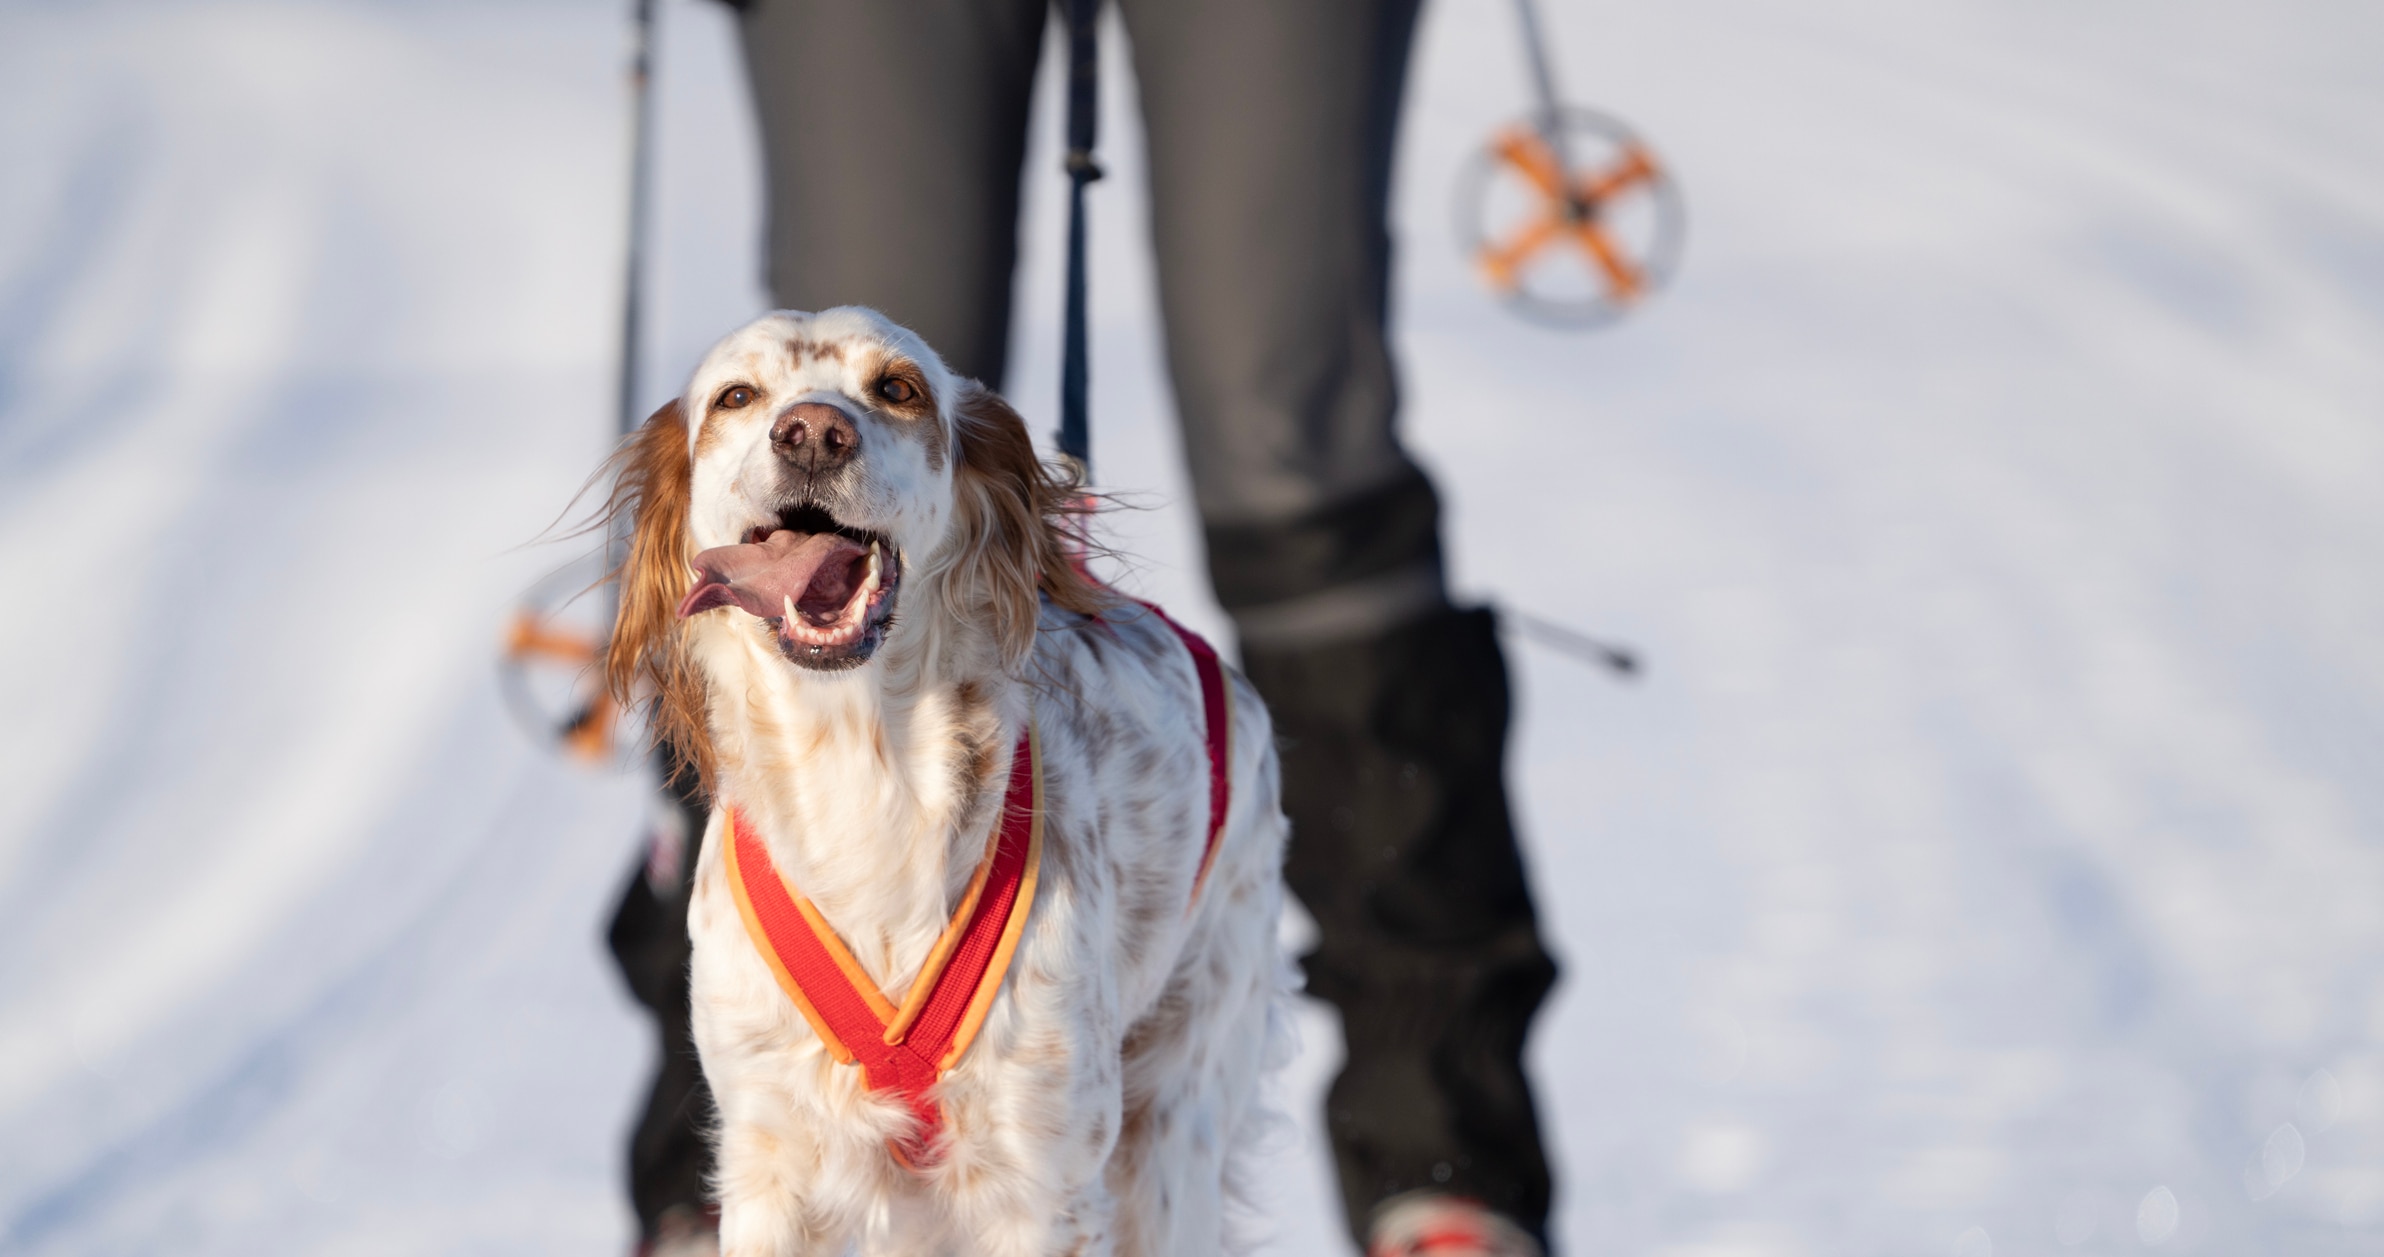 An English Setter practices canine skijoring.